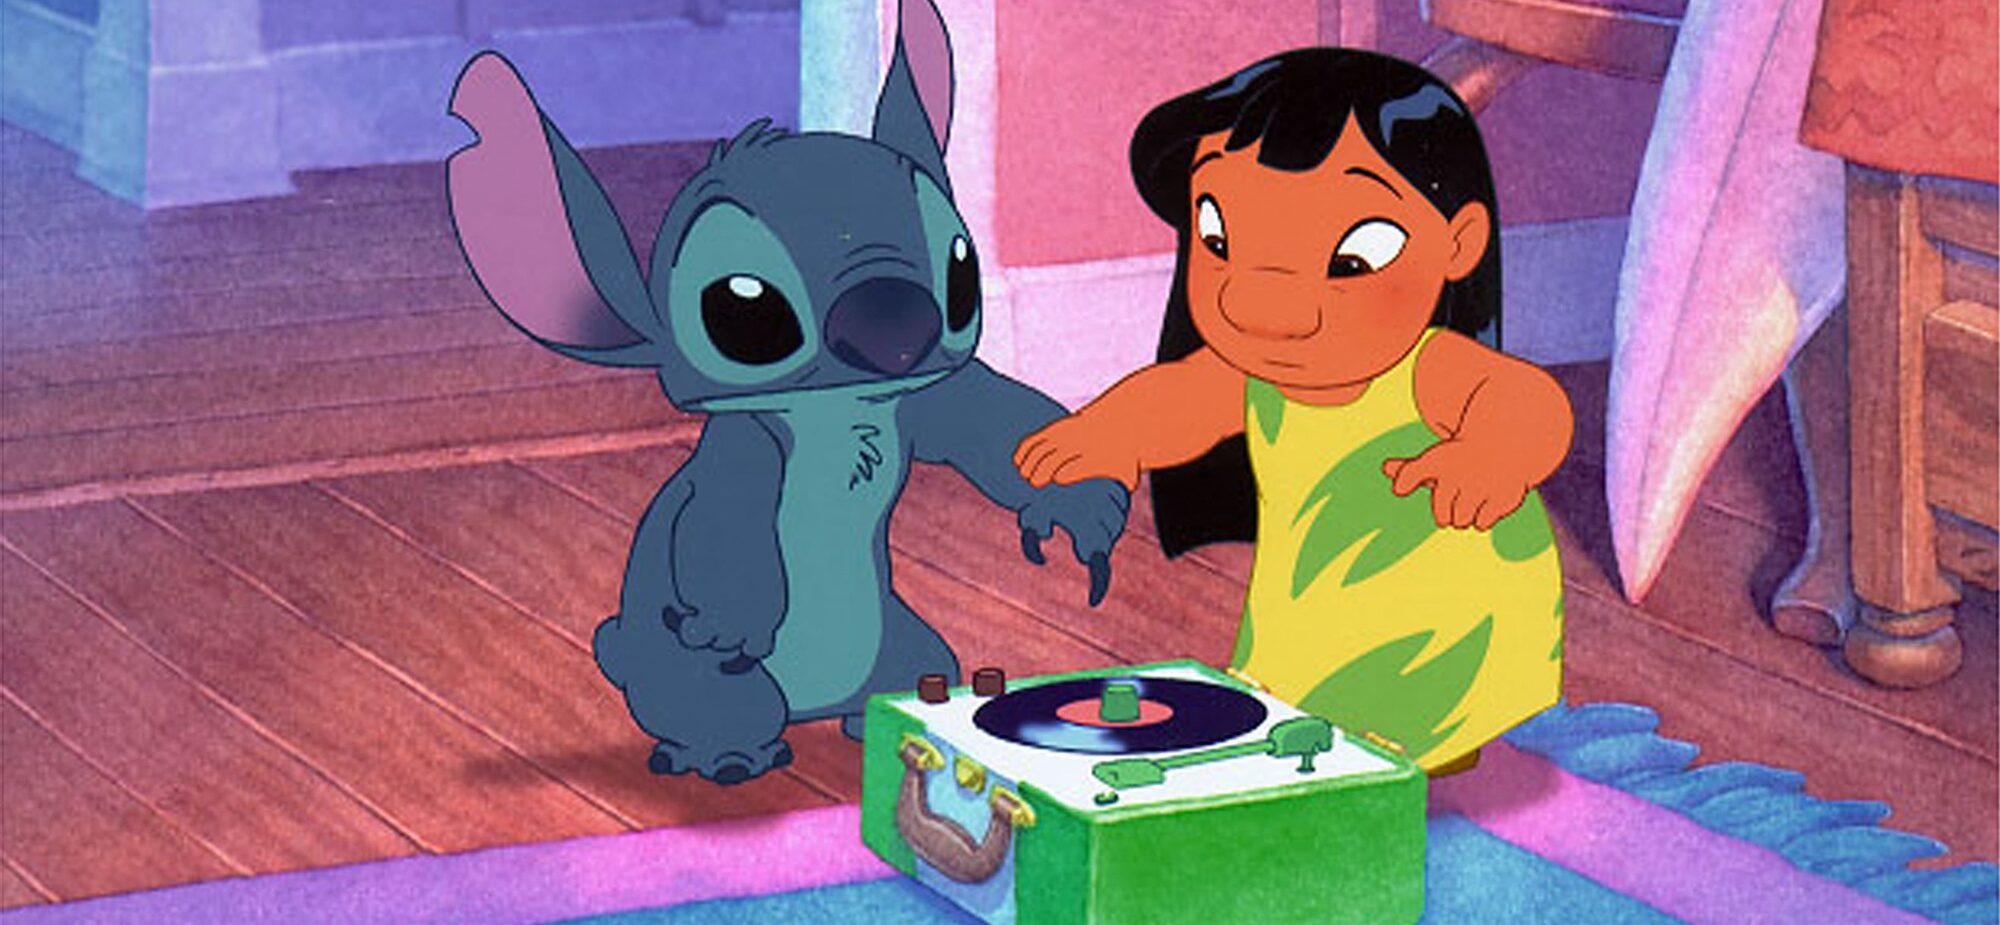 ‘Lilo & Stitch’ Creator Chris Sanders Files For Divorce After 8 Years Of Marriage